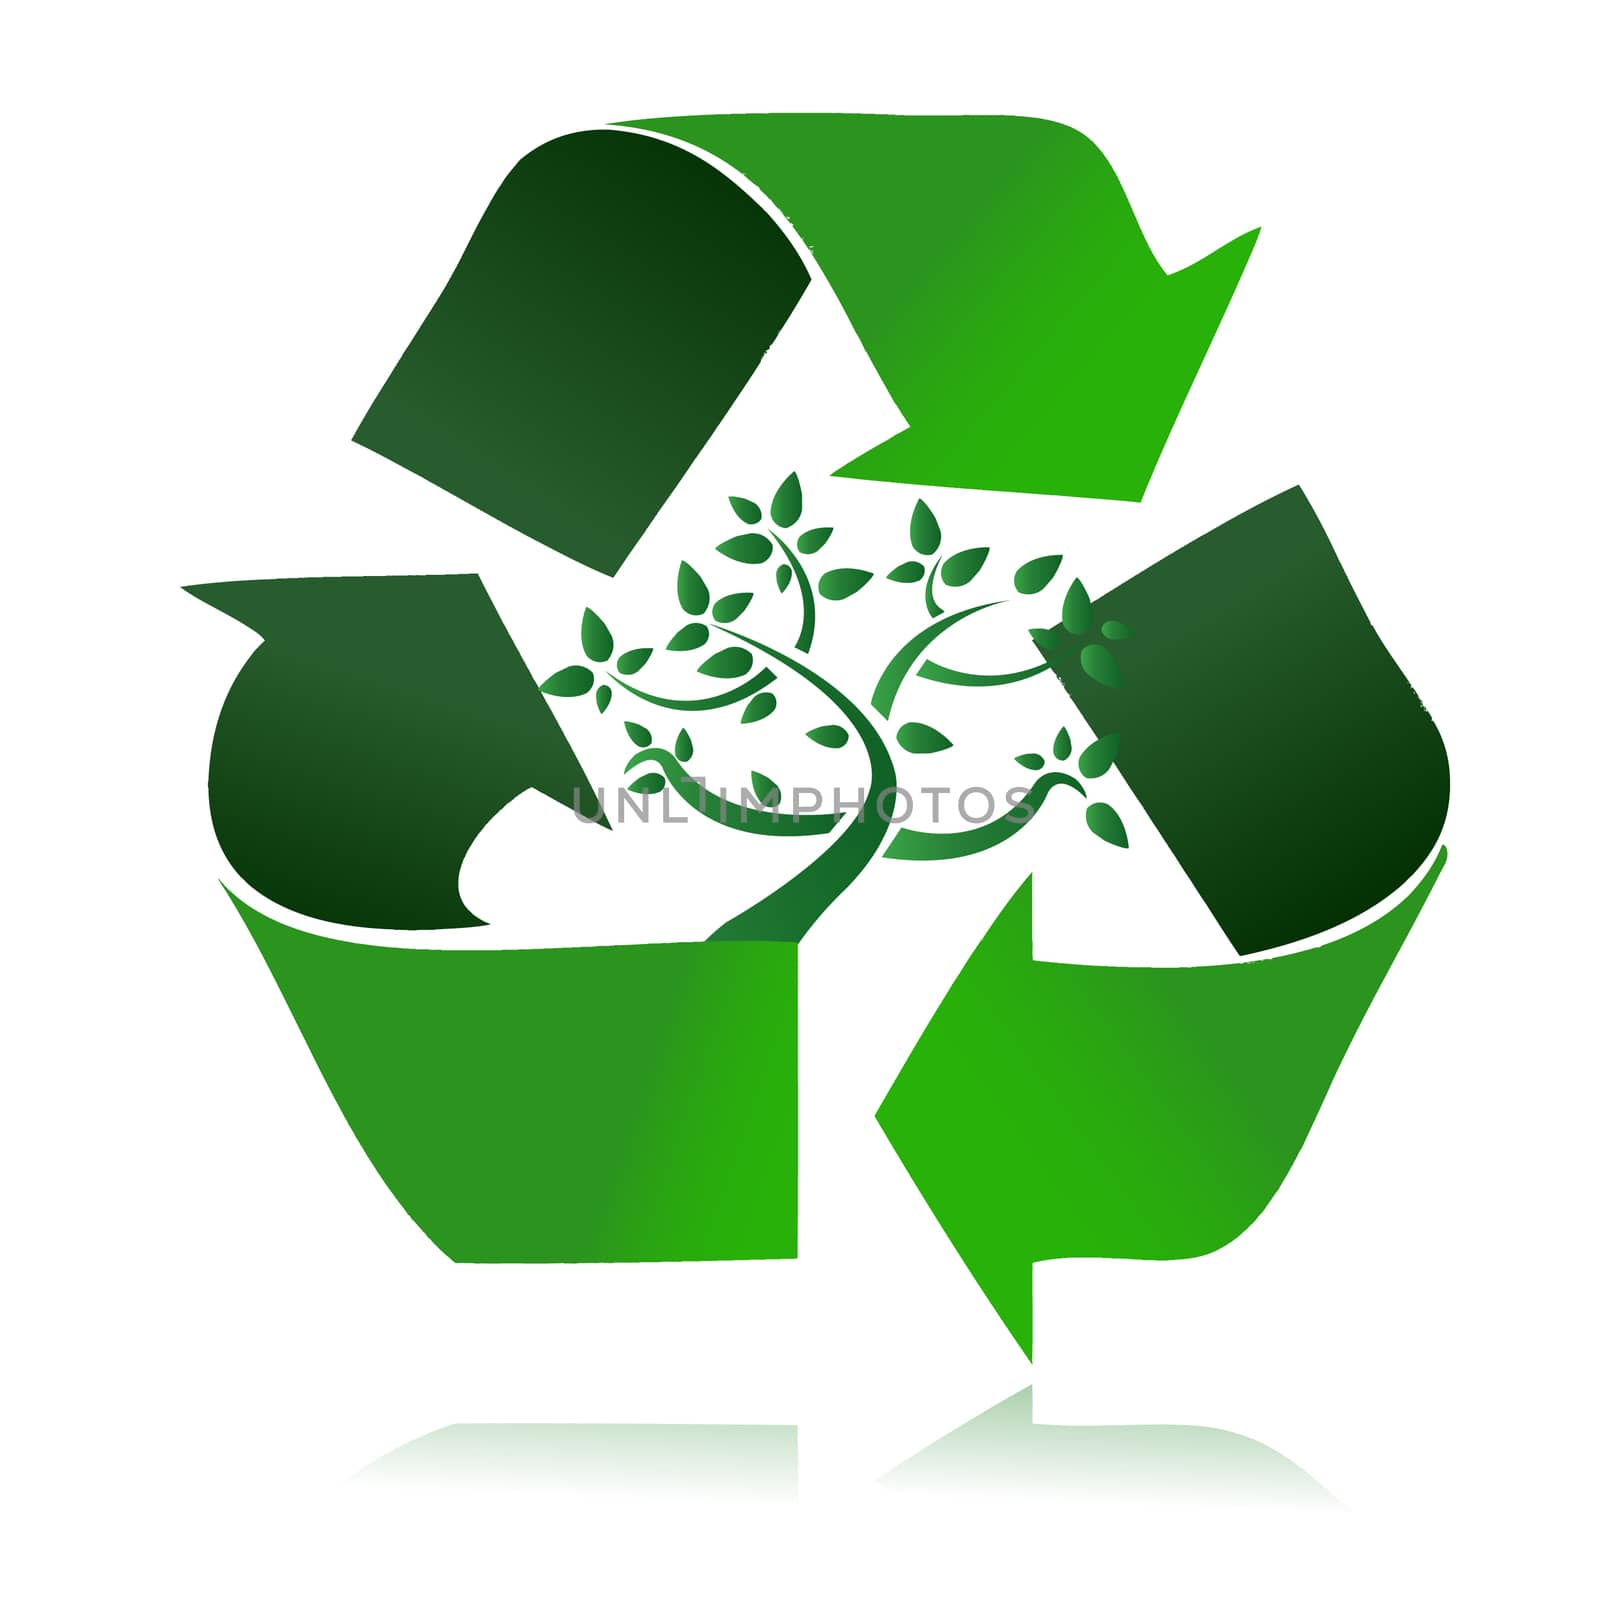 Clean environment - conceptual recycling symbol and green tree. vector file also available / Recycle Symbol